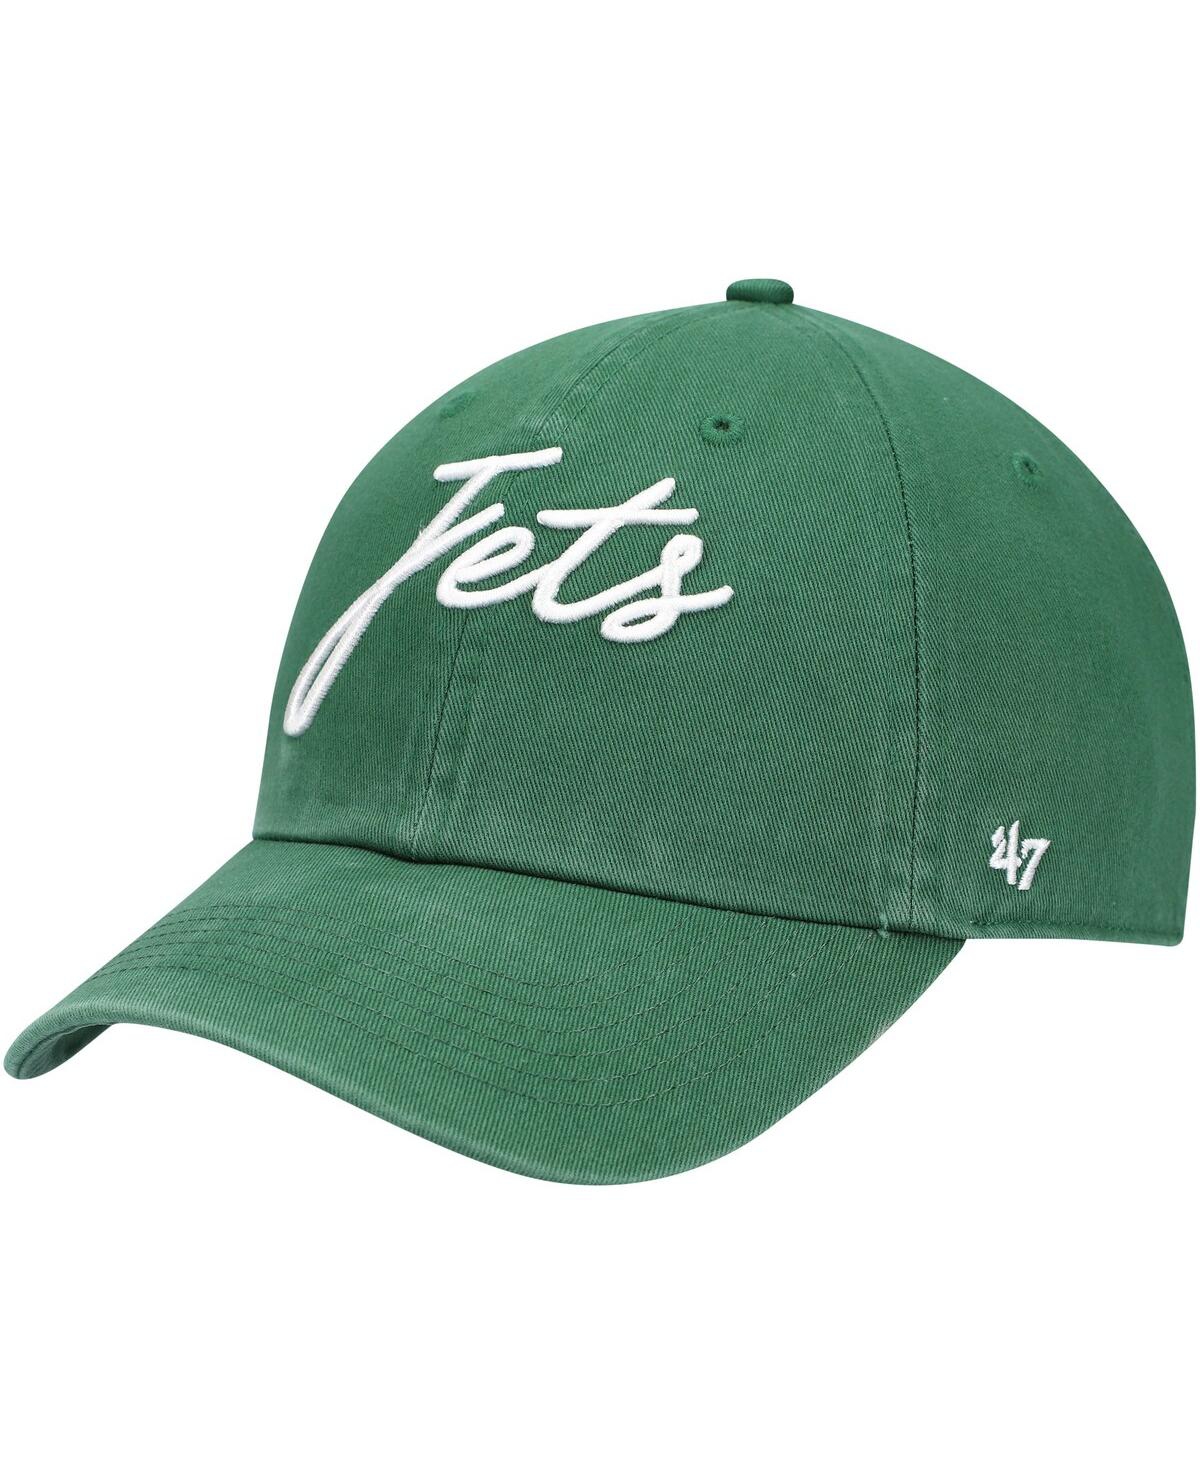 47 Brand Women's '47 Green New York Jets Vocal Clean Up Adjustable Hat